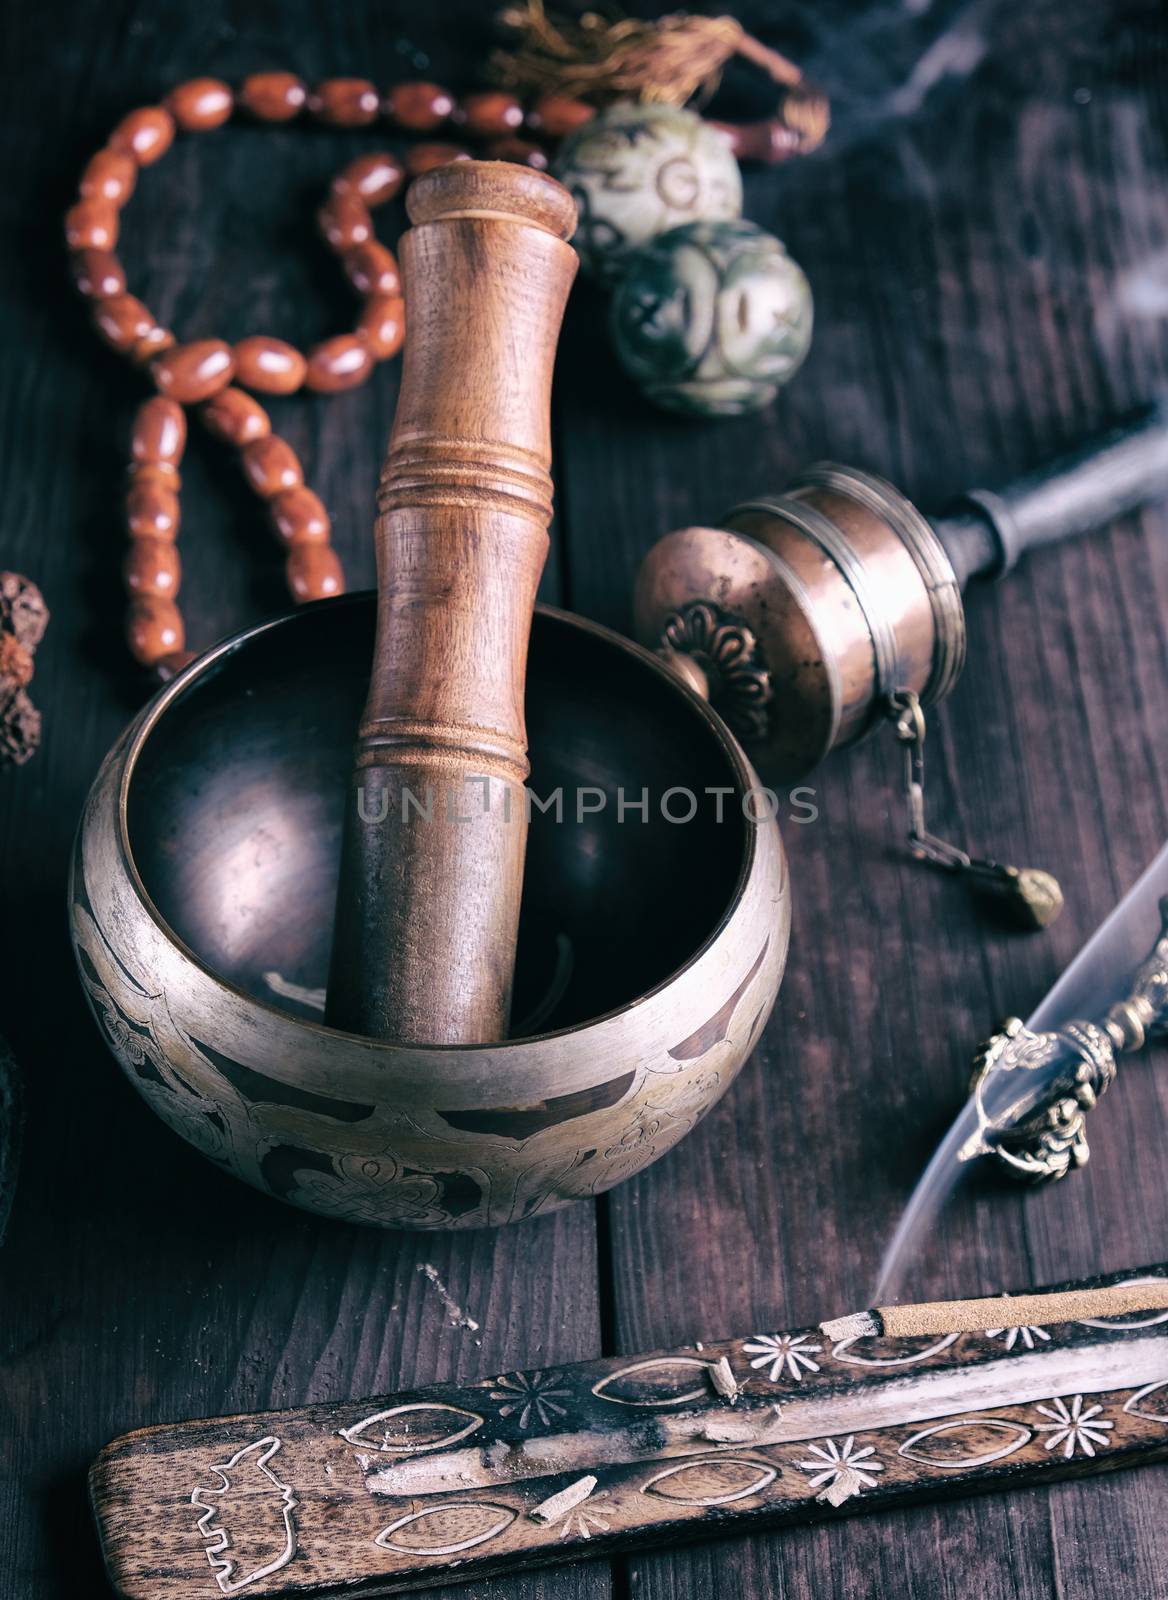 copper singing bowl and a wooden stick on a brown table, vintage toning